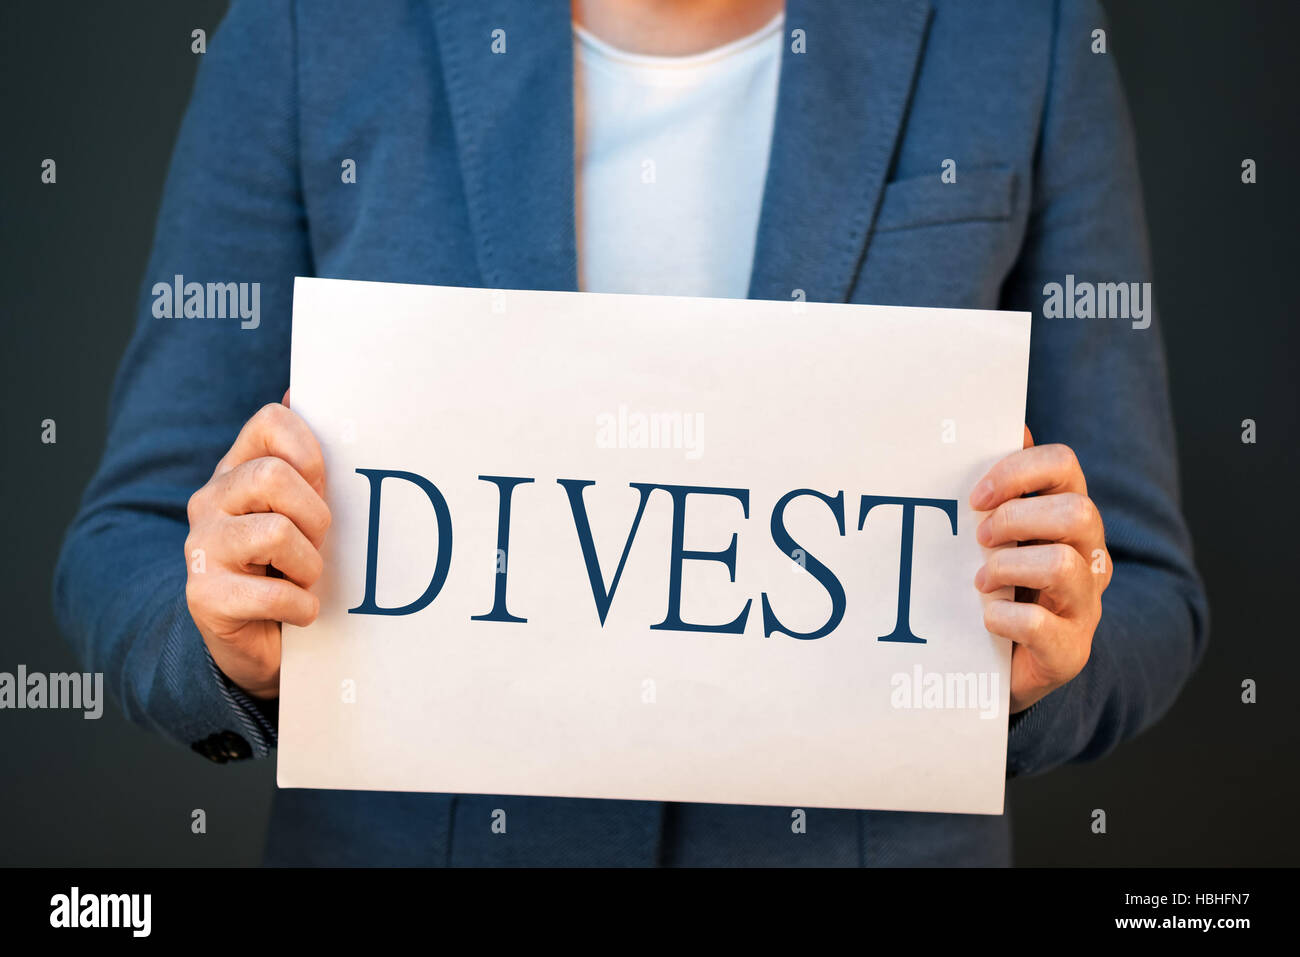 Divestment concept with businesswoman in suite - finance and economics business theme. Stock Photo